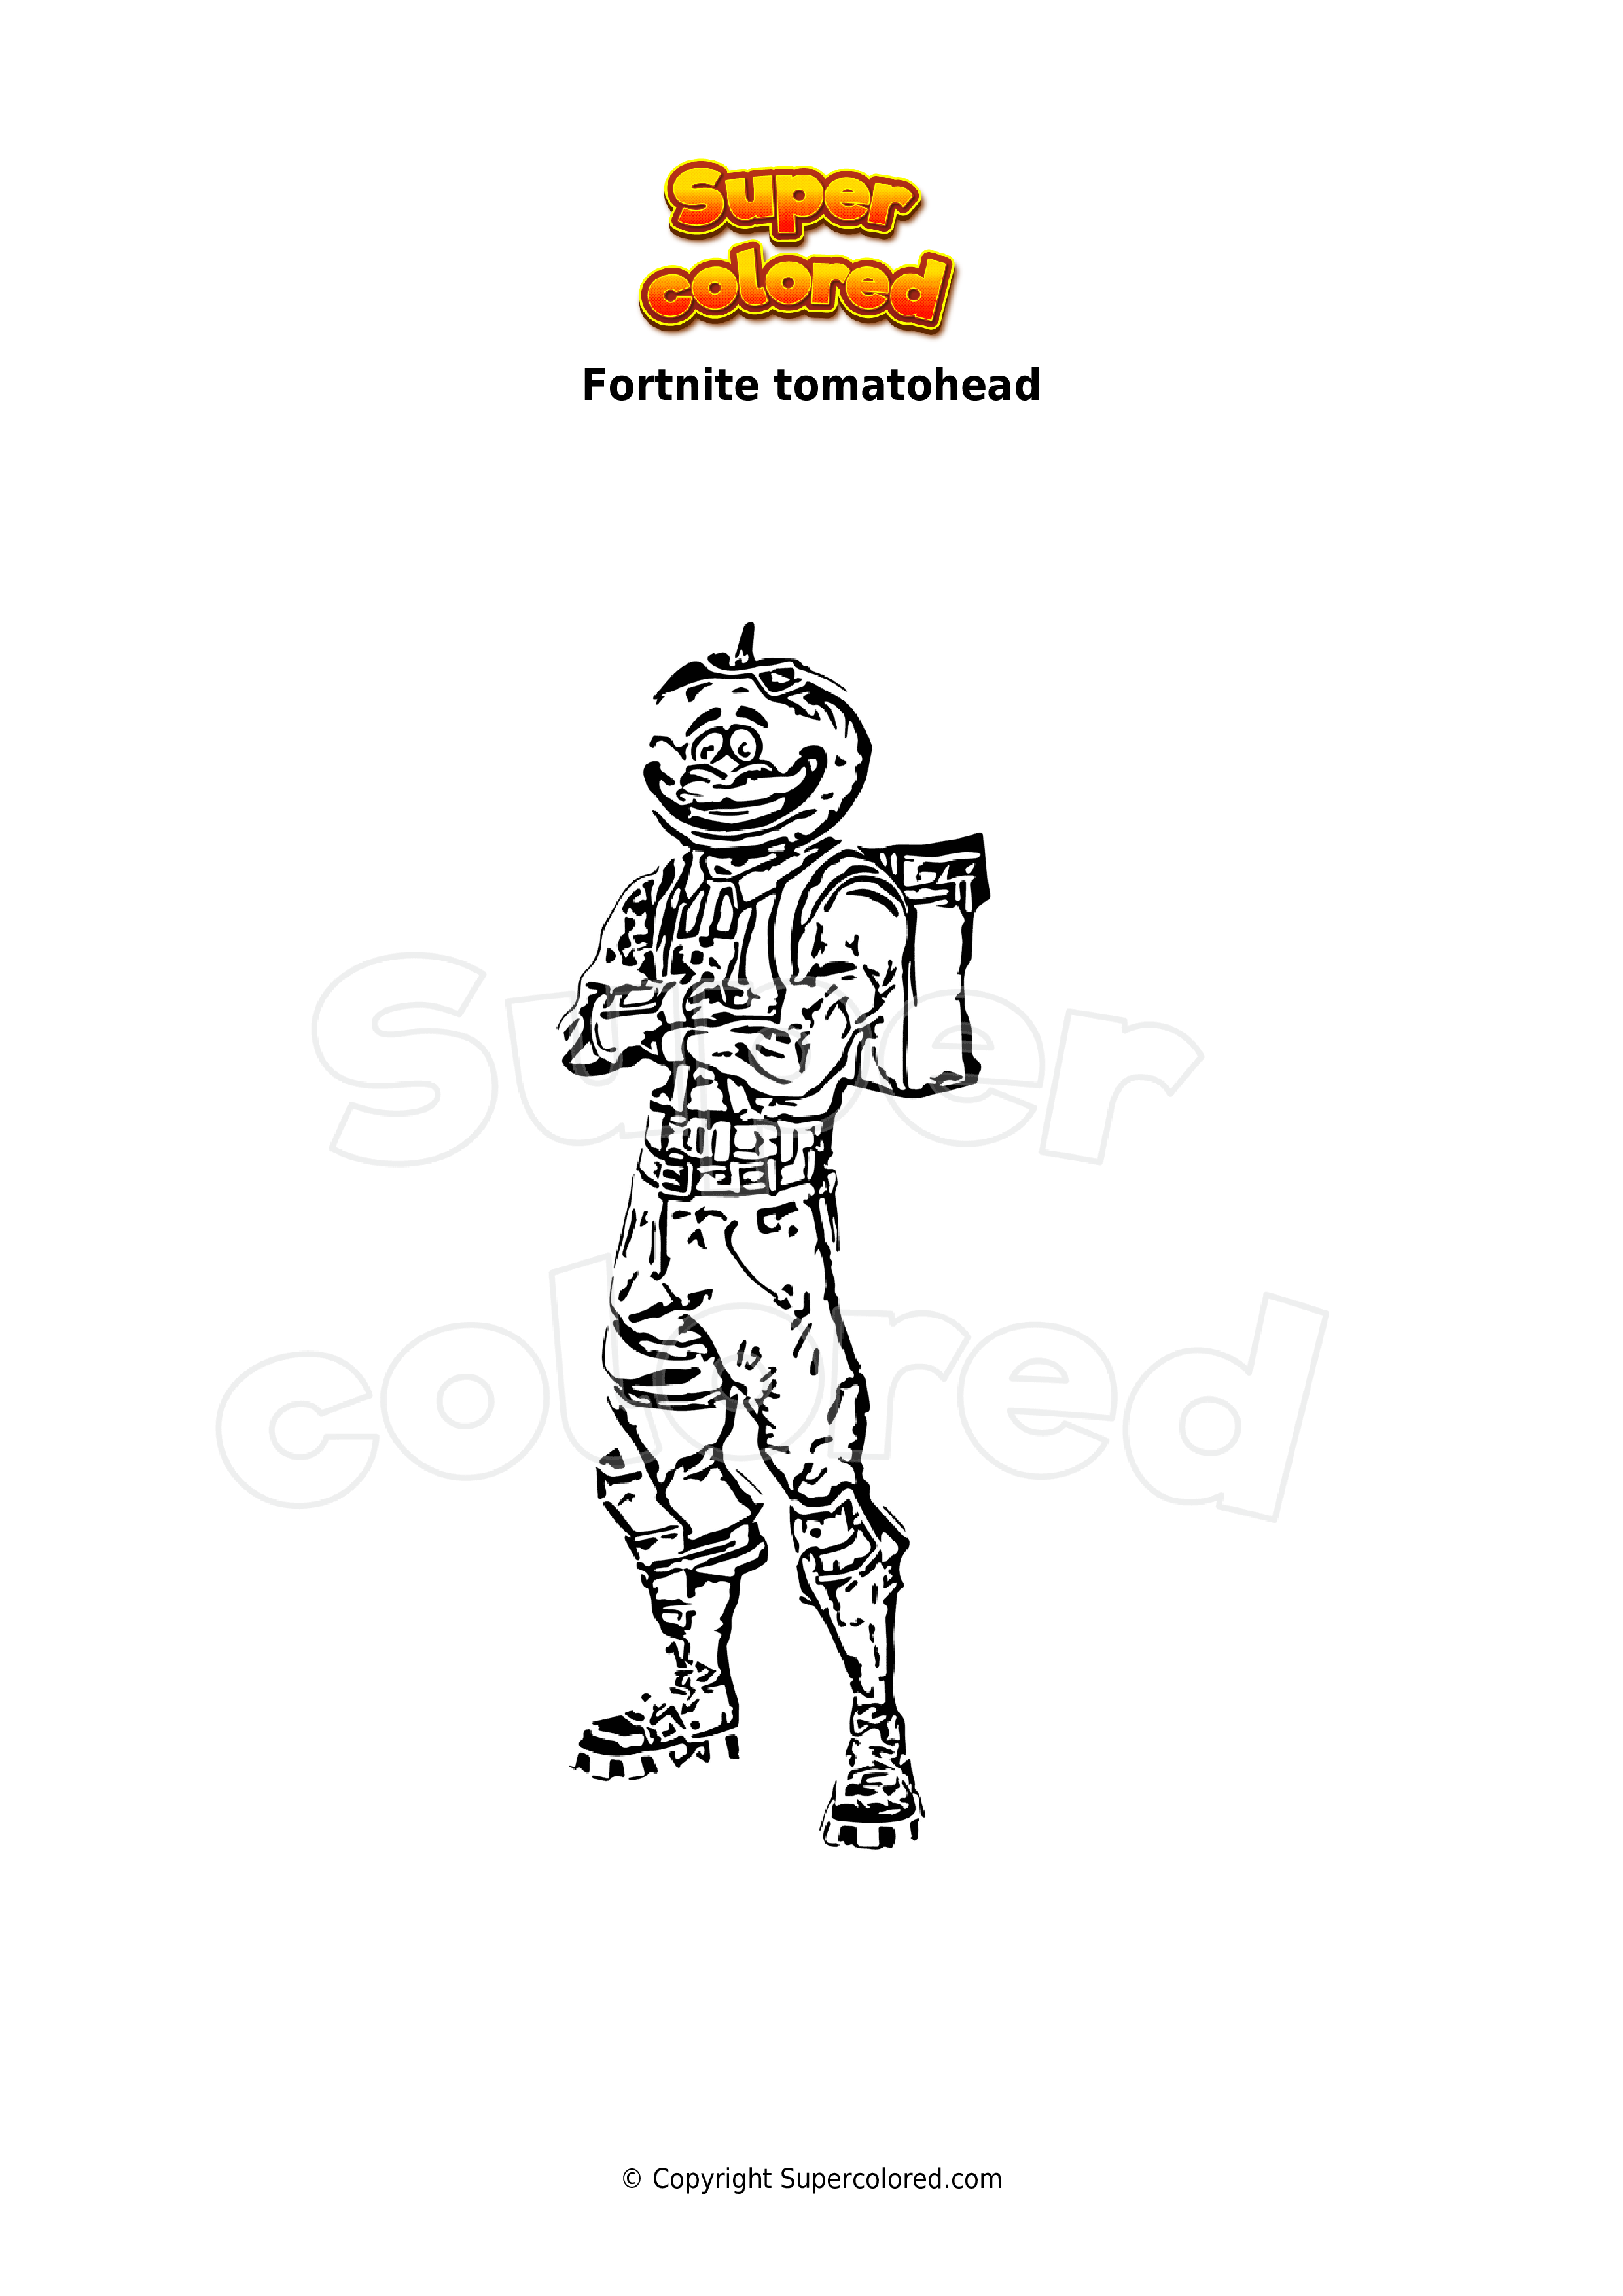 Fortnite Coloring Pages Tomatohead Coloring Page Blog Porn Sex Picture